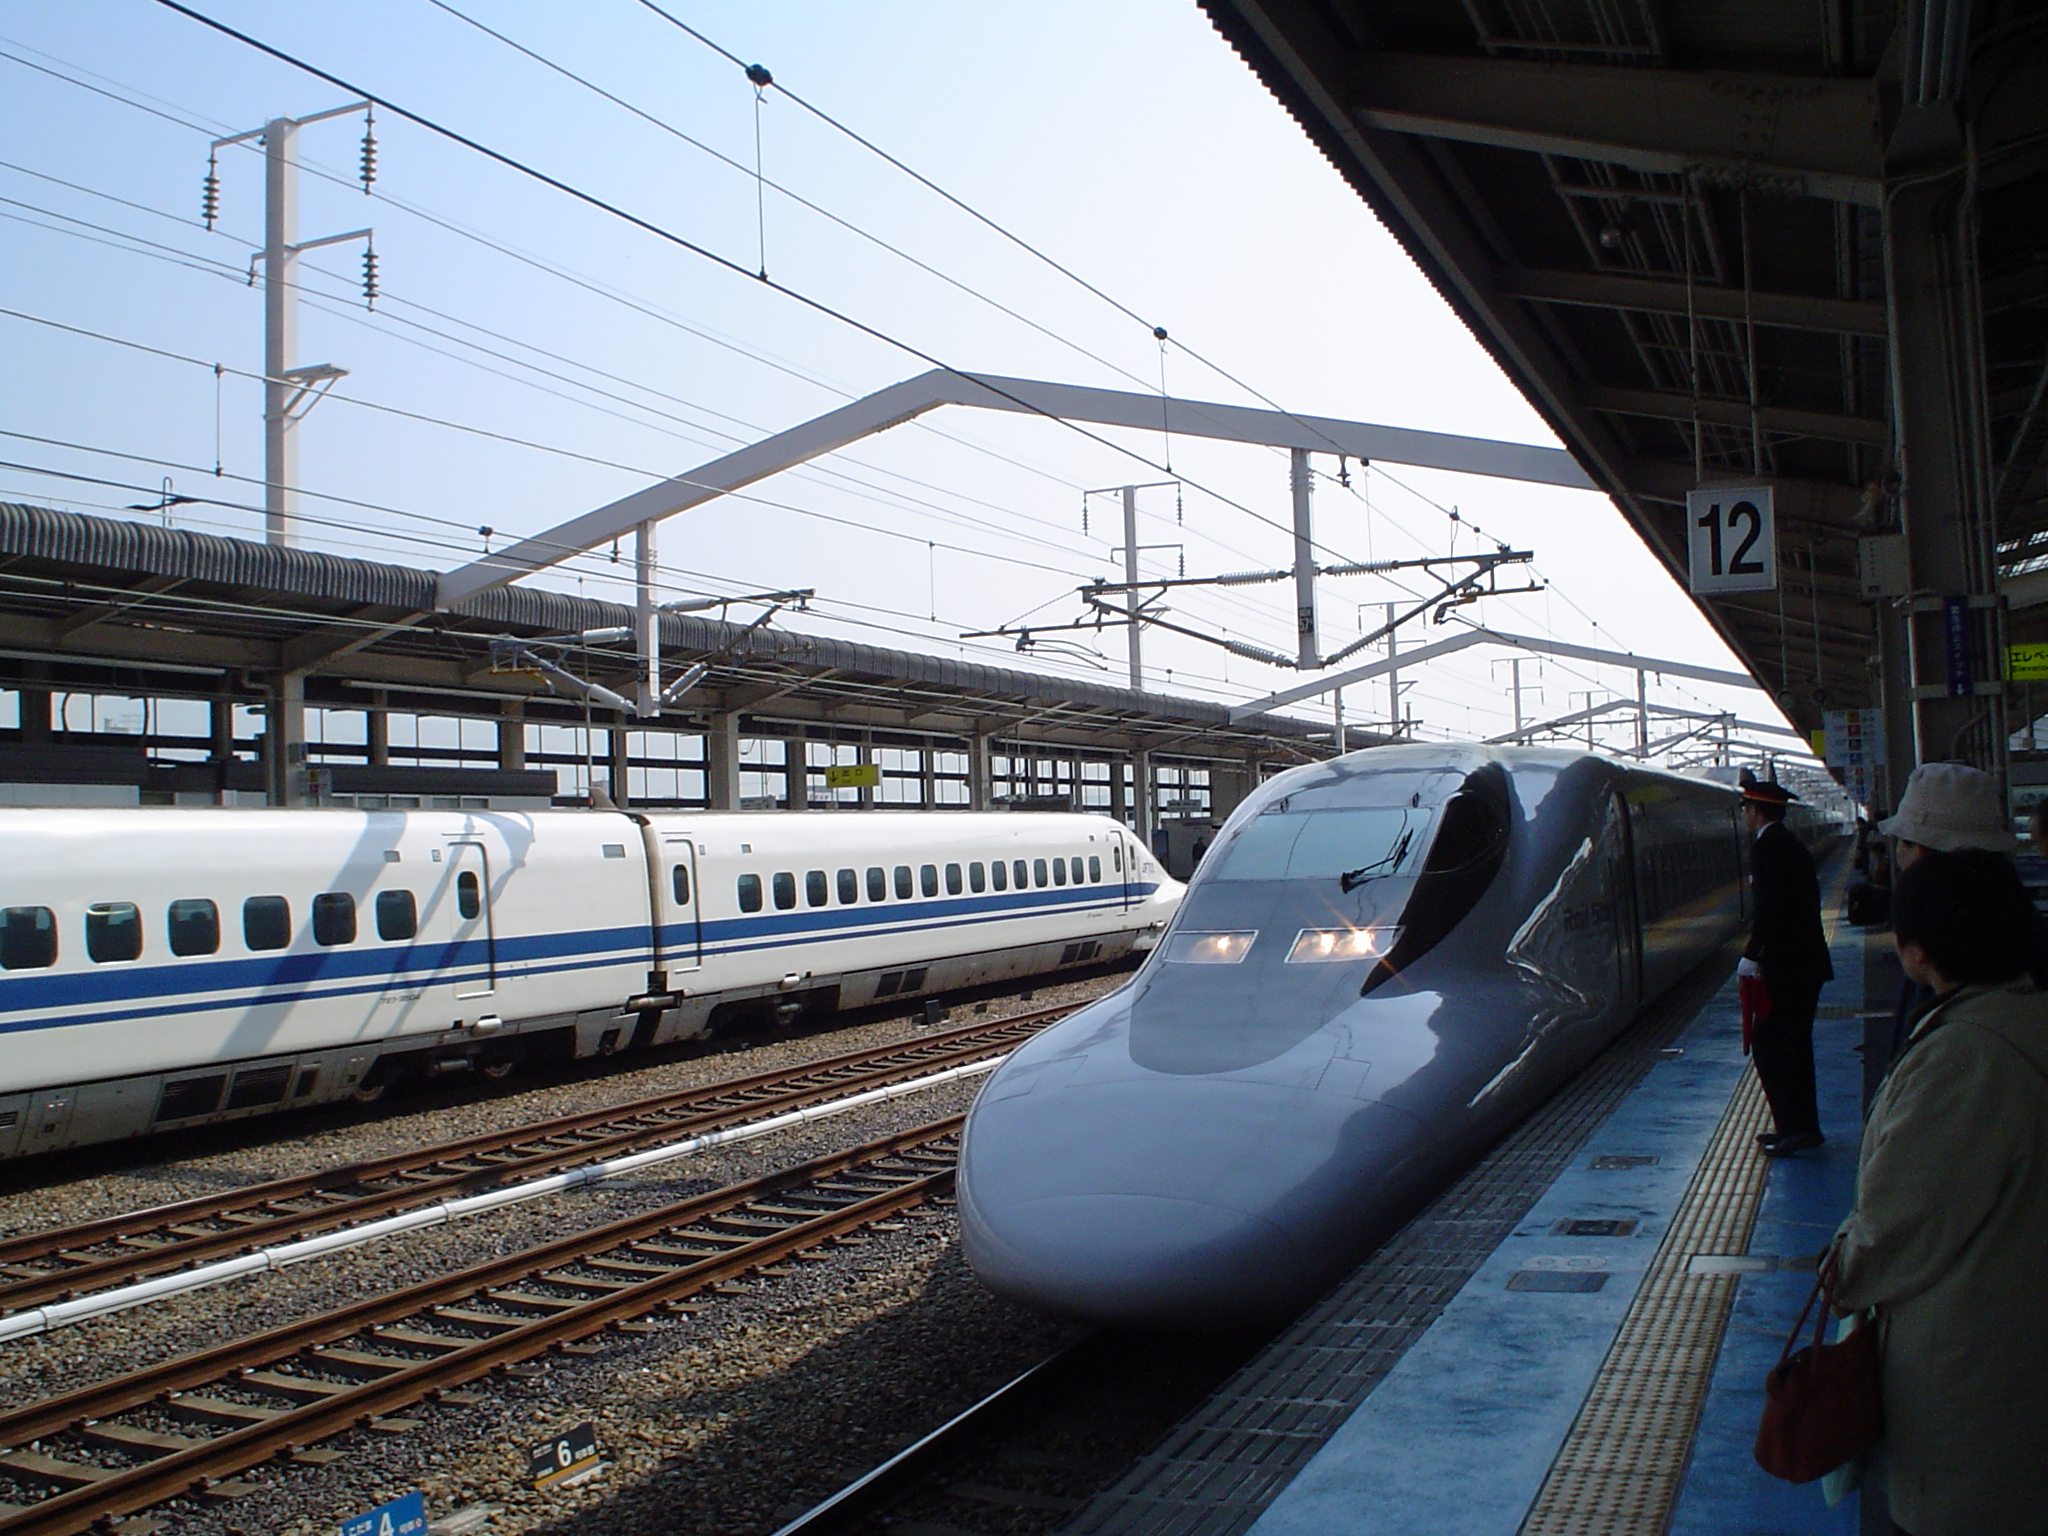 there is a high speed train pulling into the station